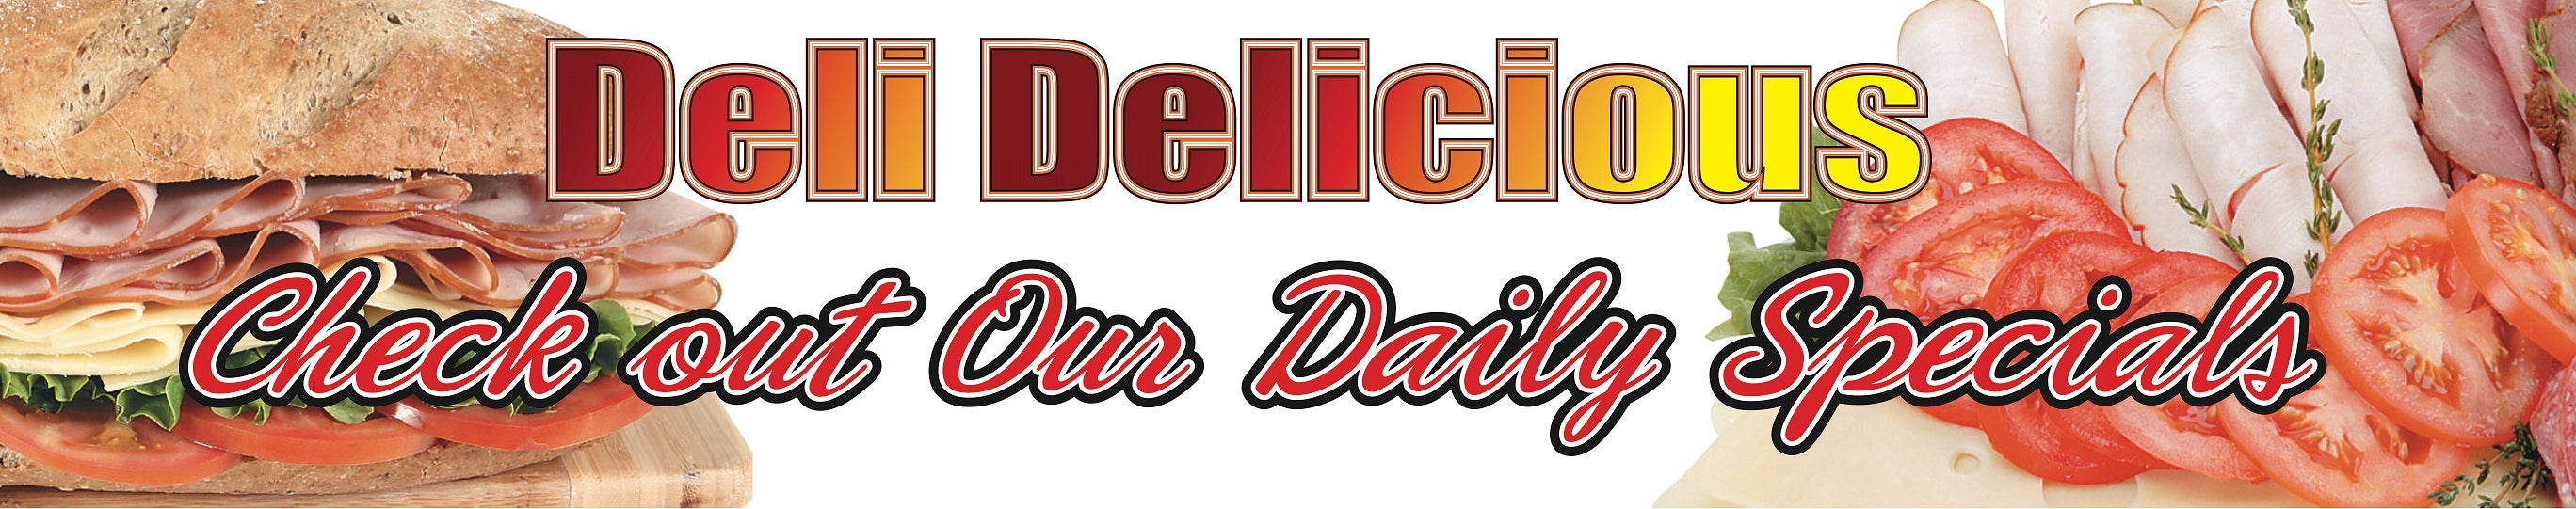 Deli Daily Specials Ceiling Dangler-Hanging Sign